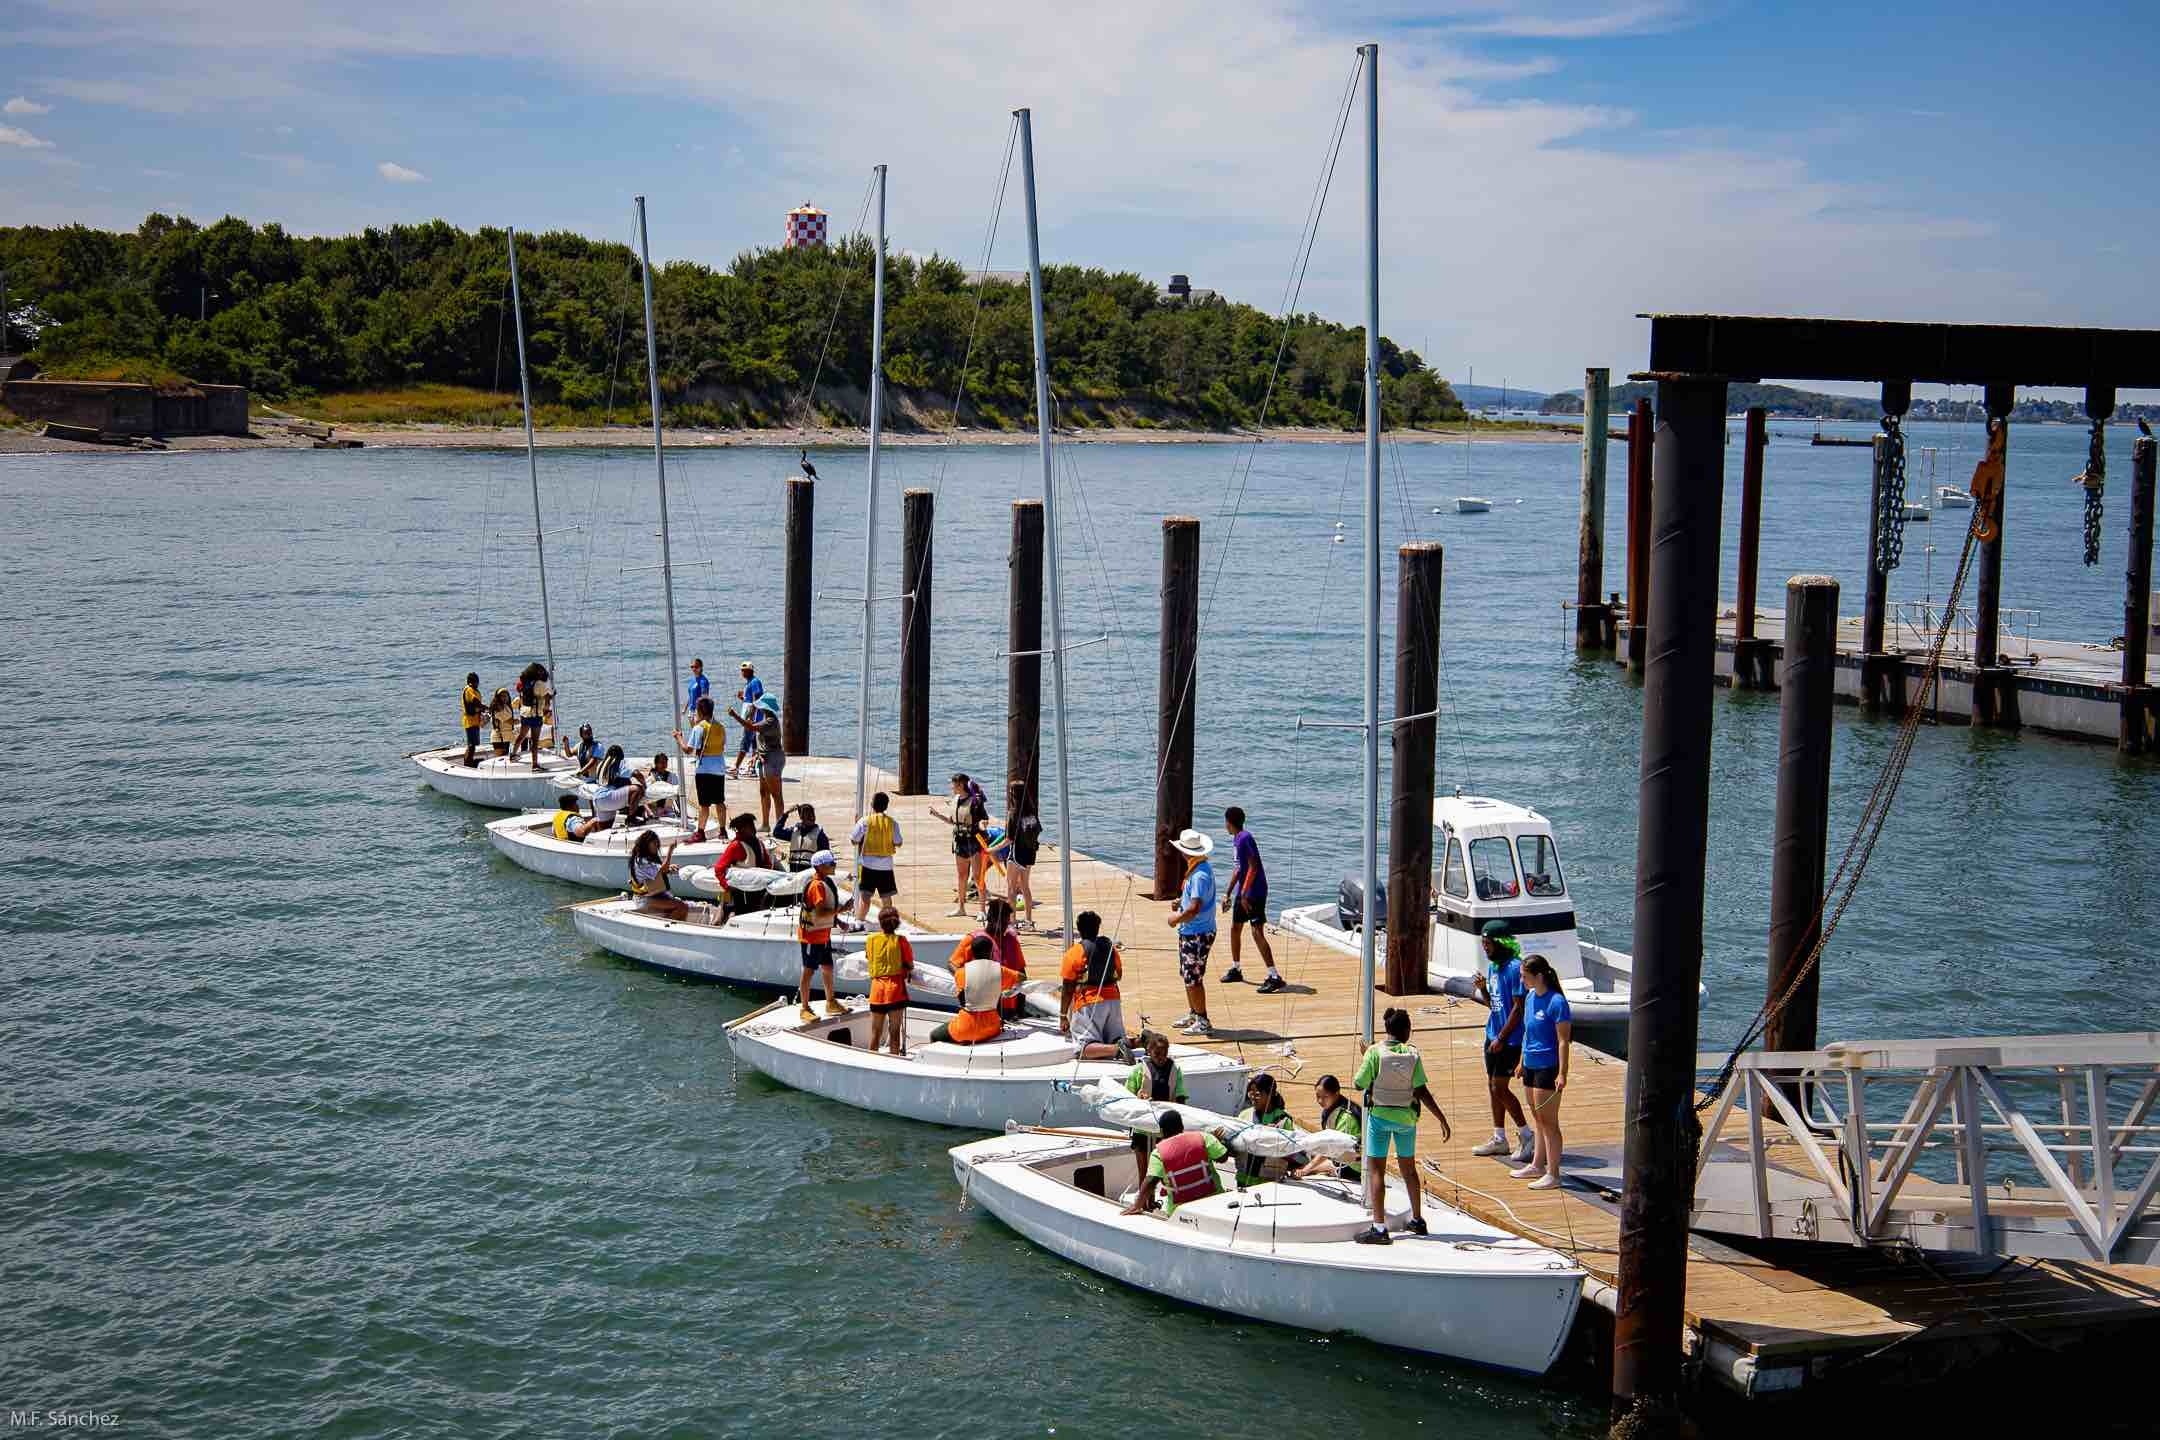 Students at Camp Harbor View getting into sailboats; each boat consists of a team wearing the same color